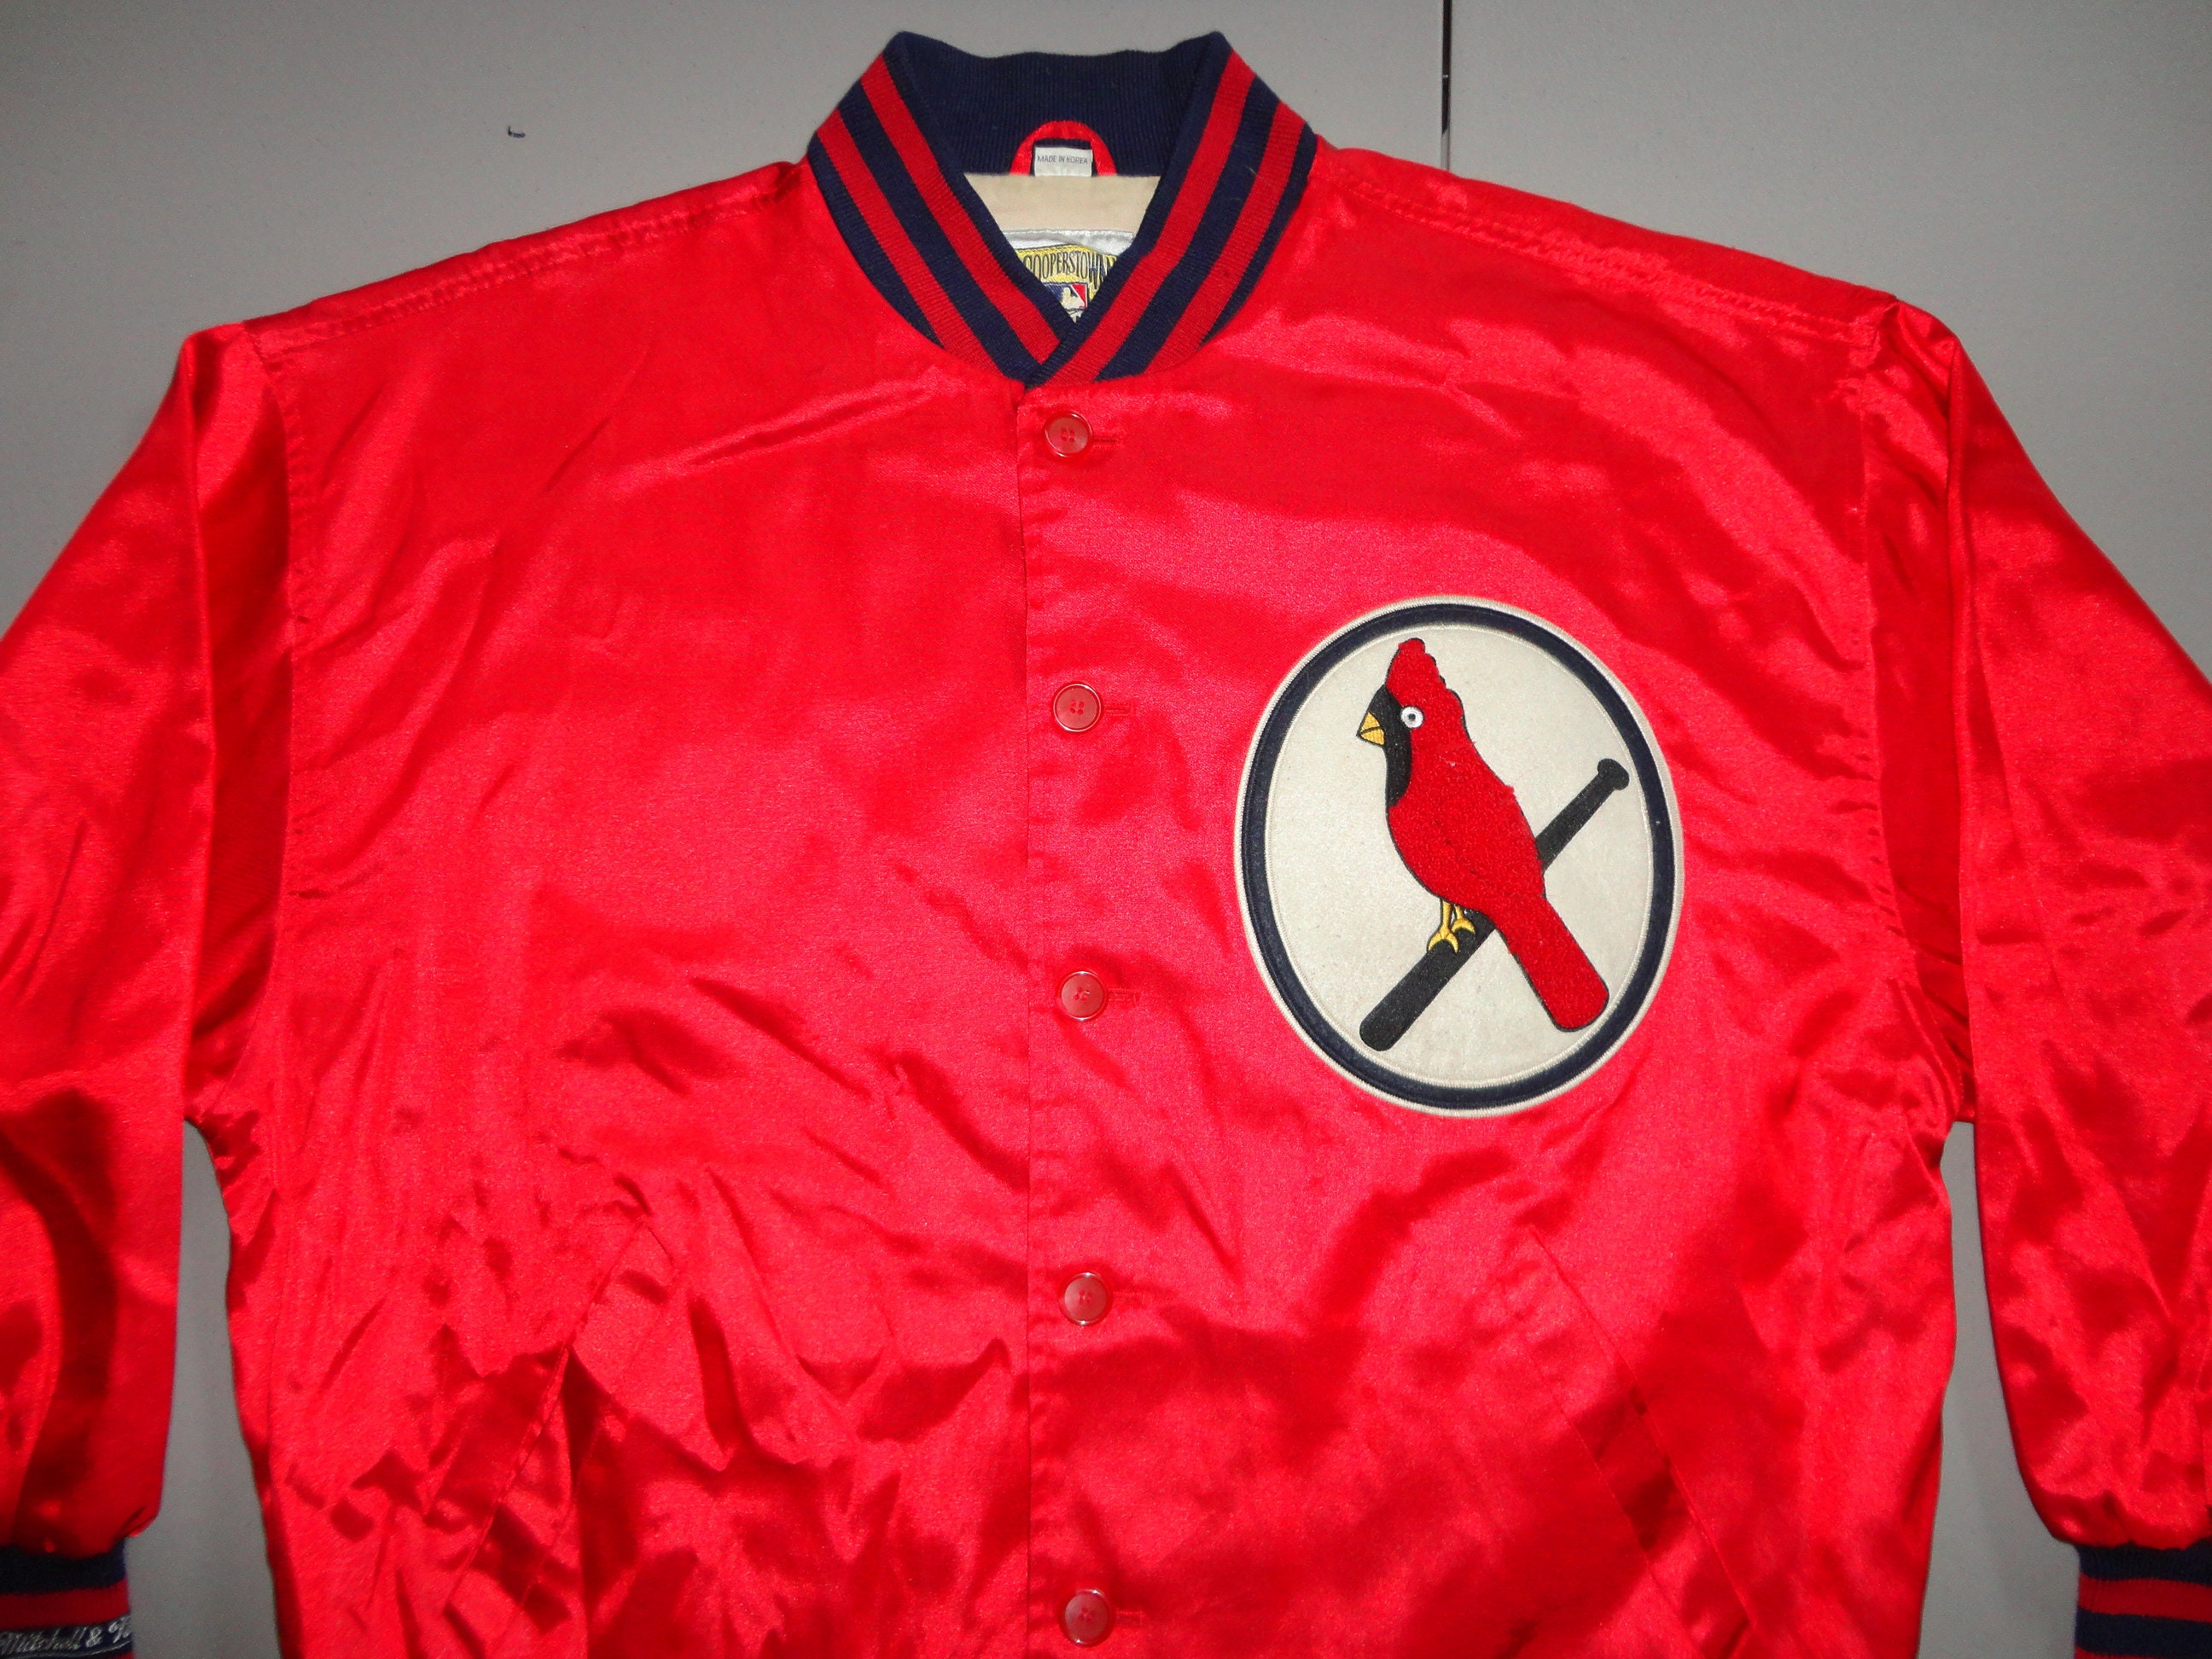 1982 Cooperstown Collection St. Louis Cardinals Jacket XL